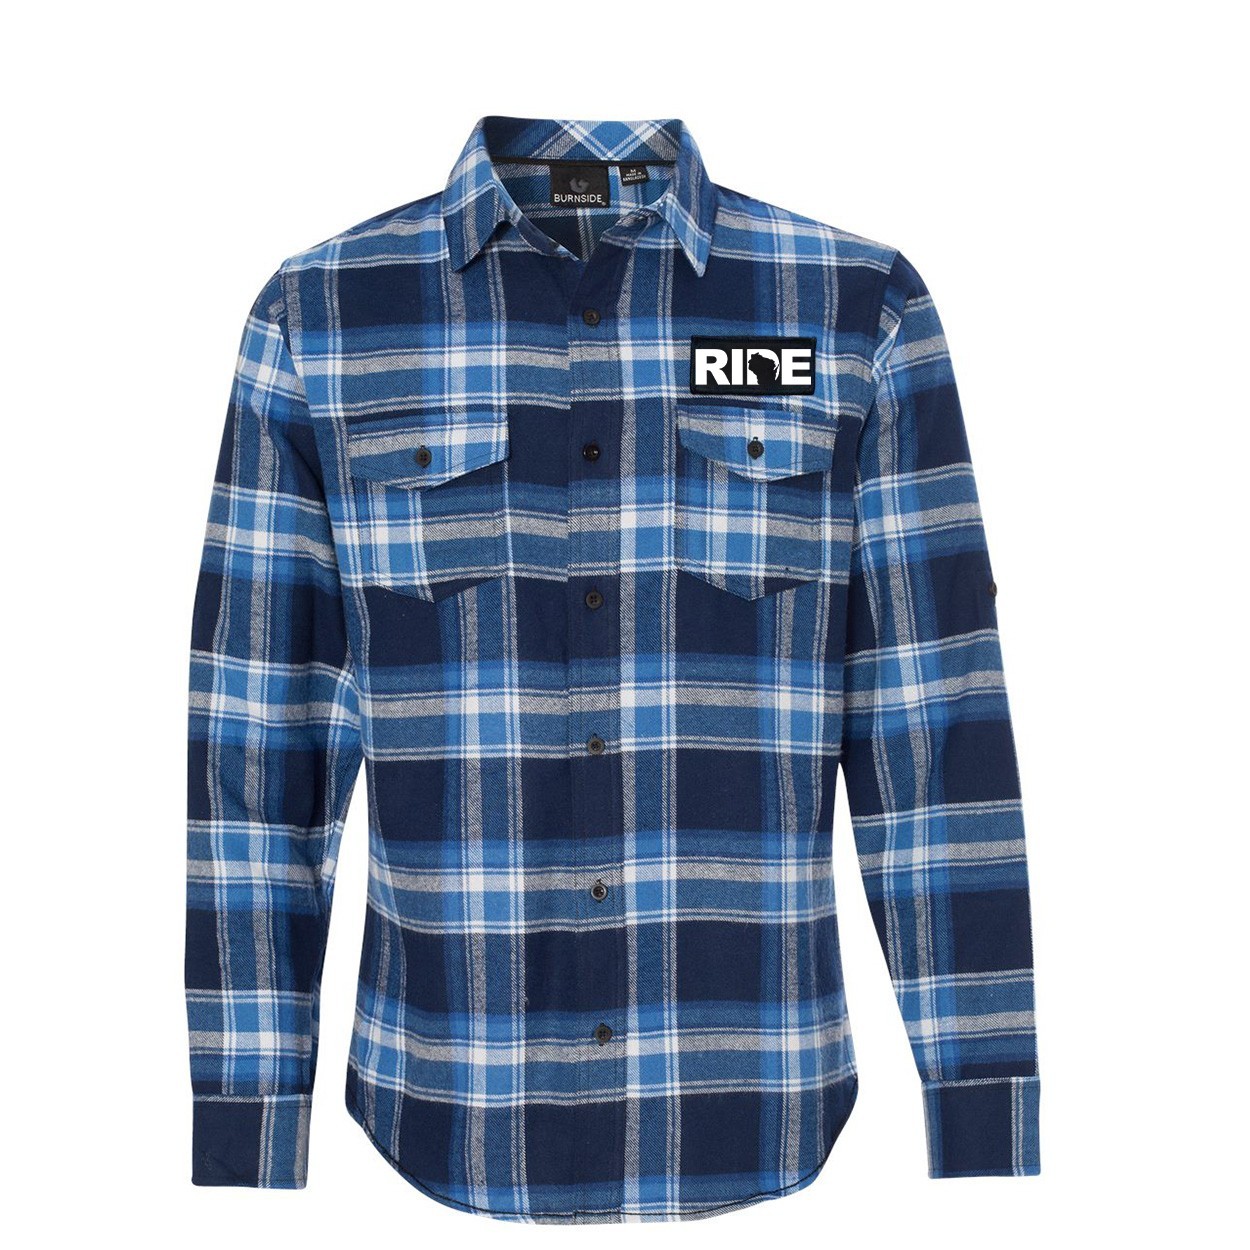 Ride Wisconsin Classic Unisex Long Sleeve Woven Patch Flannel Shirt Blue/White (White Logo)